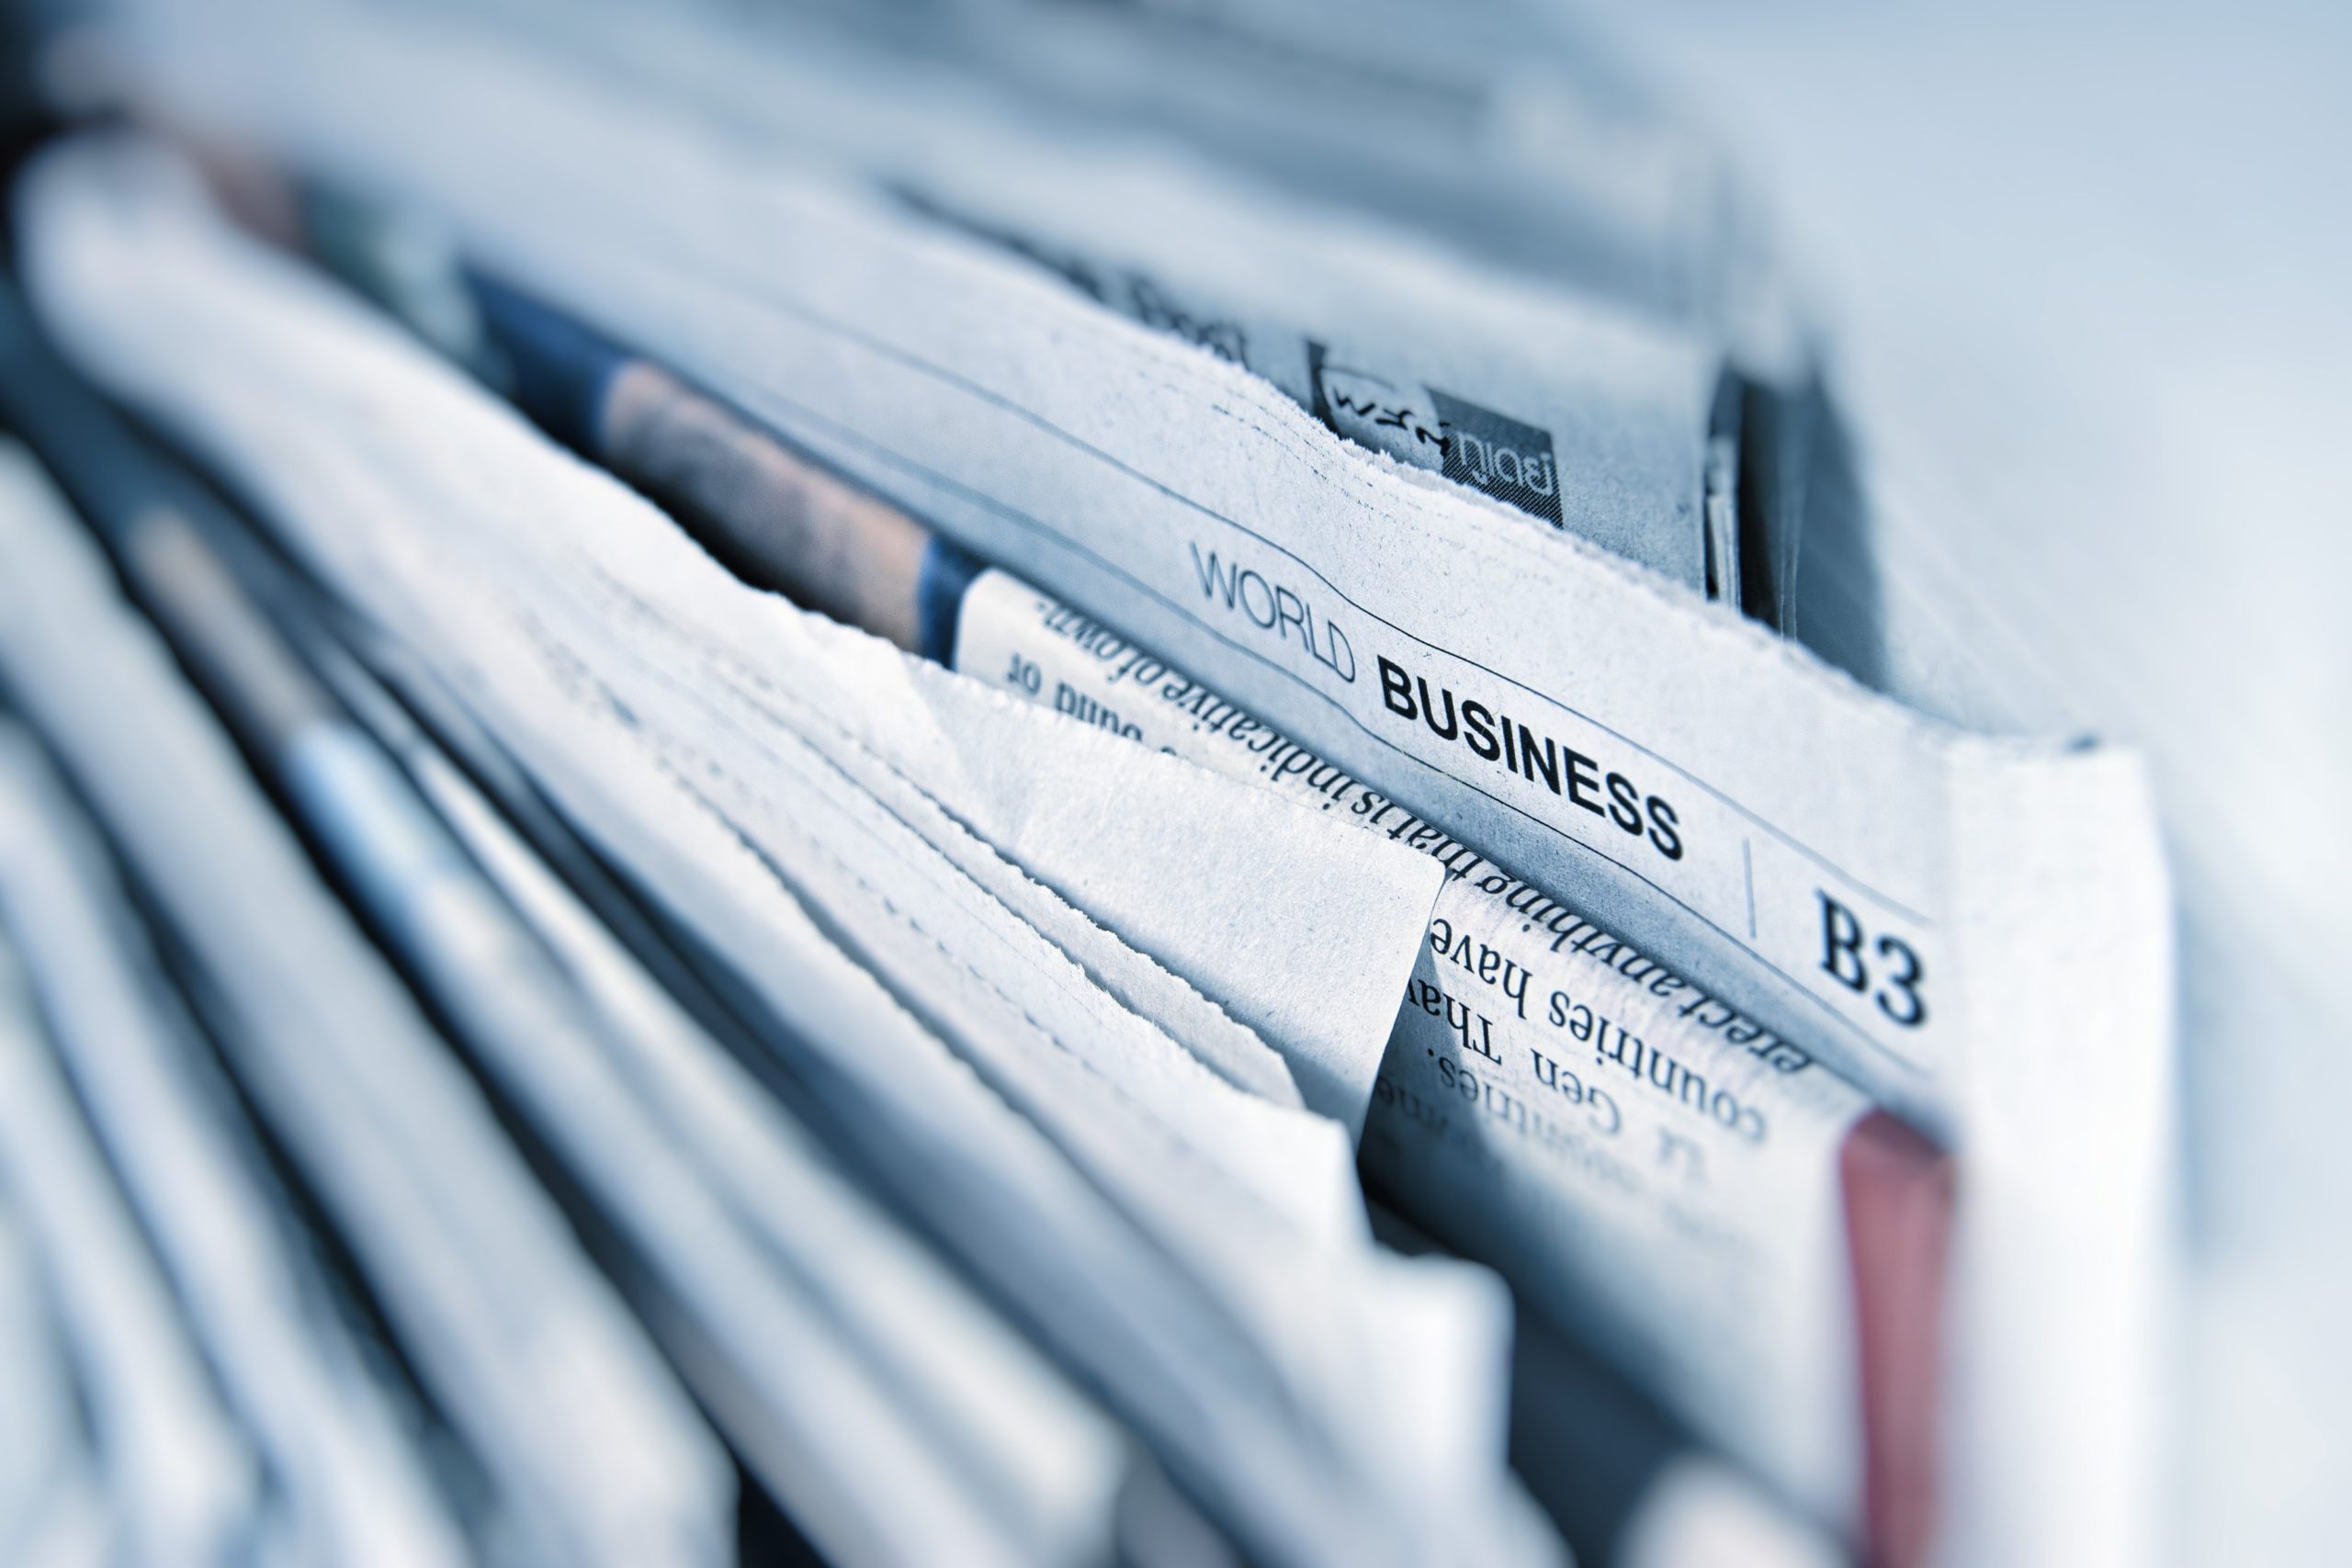 Press Releases: How to capture the media’s attention